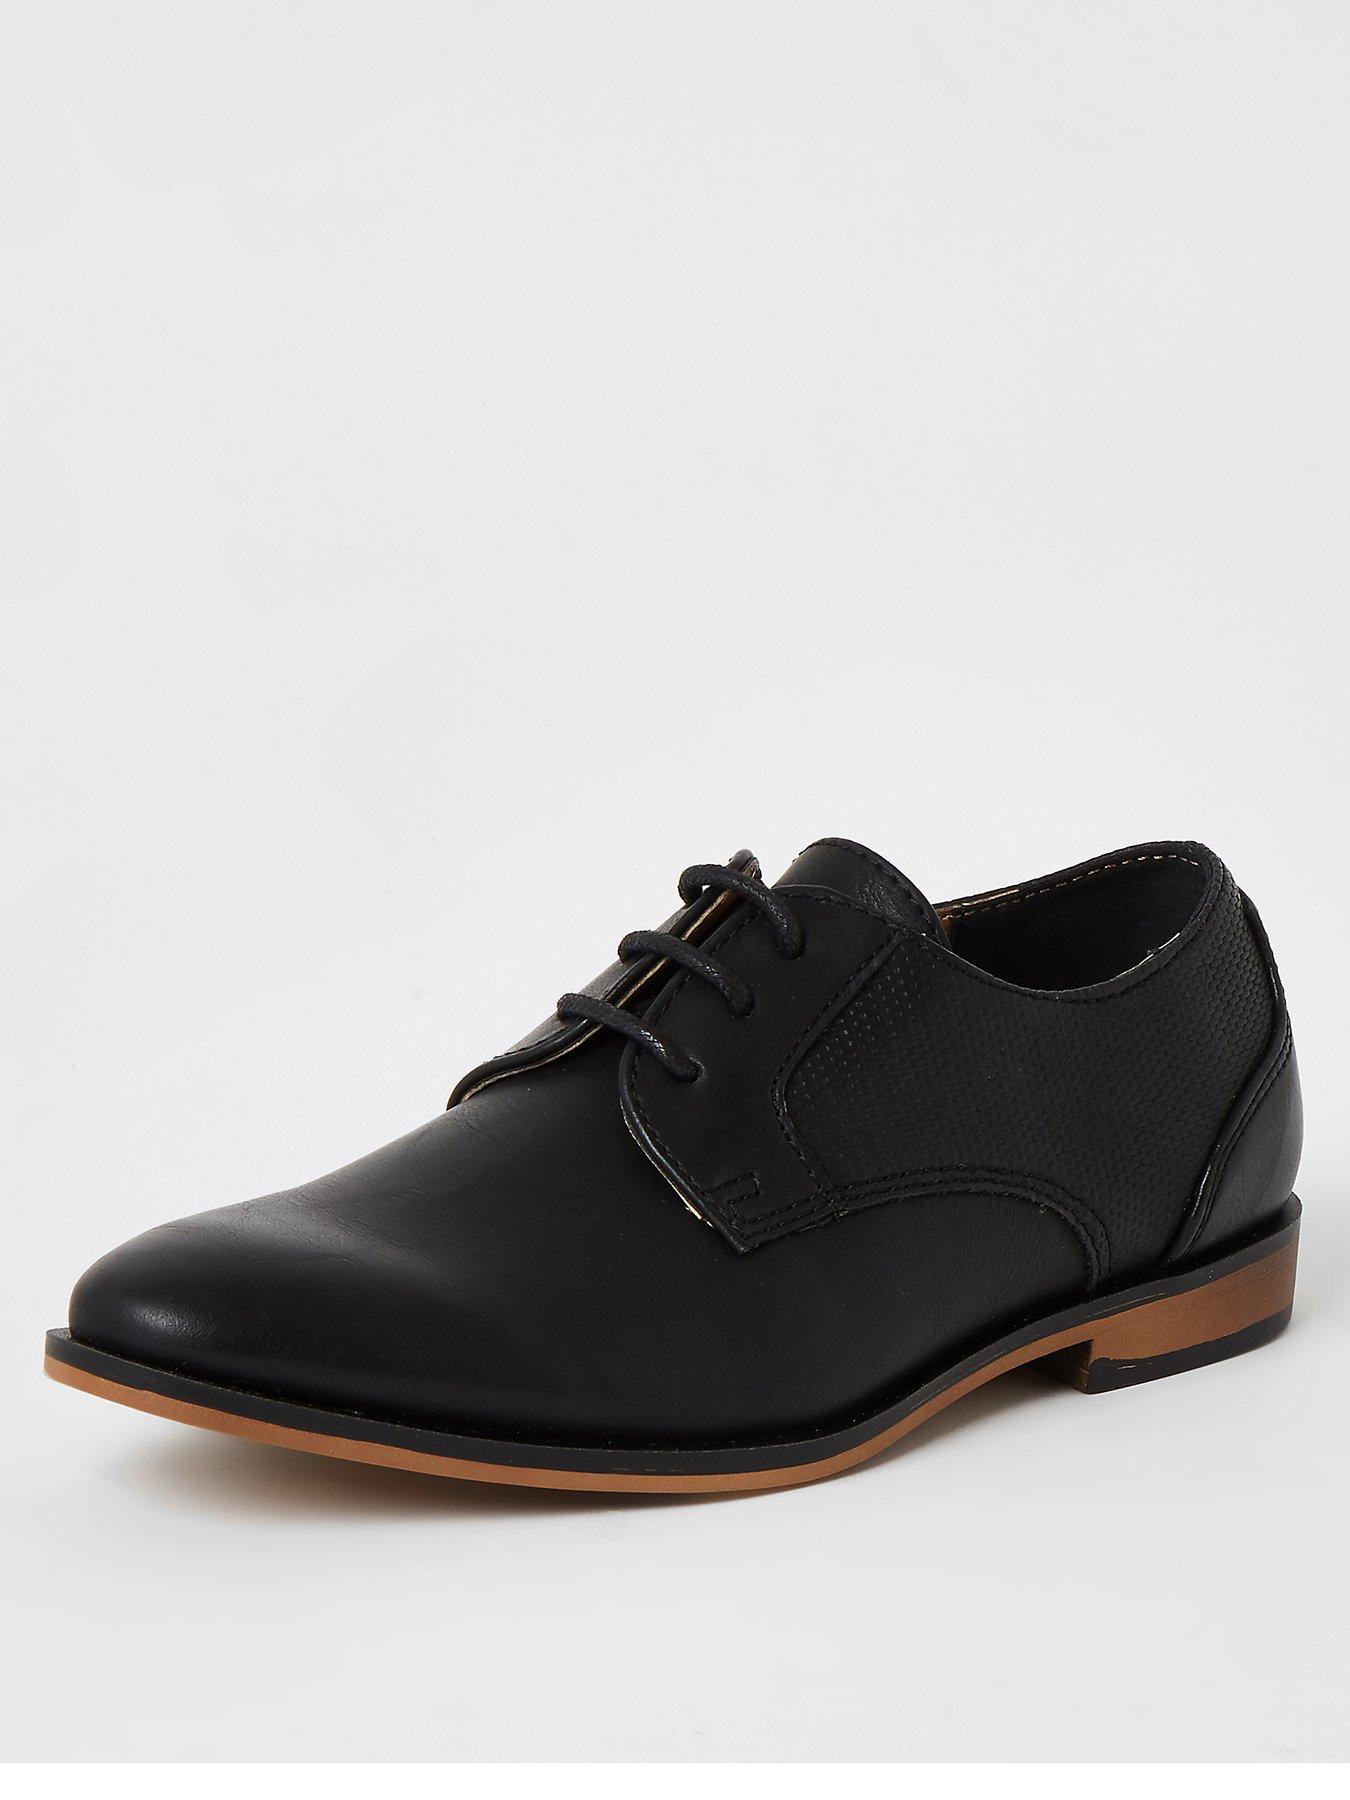 black pointed school shoes